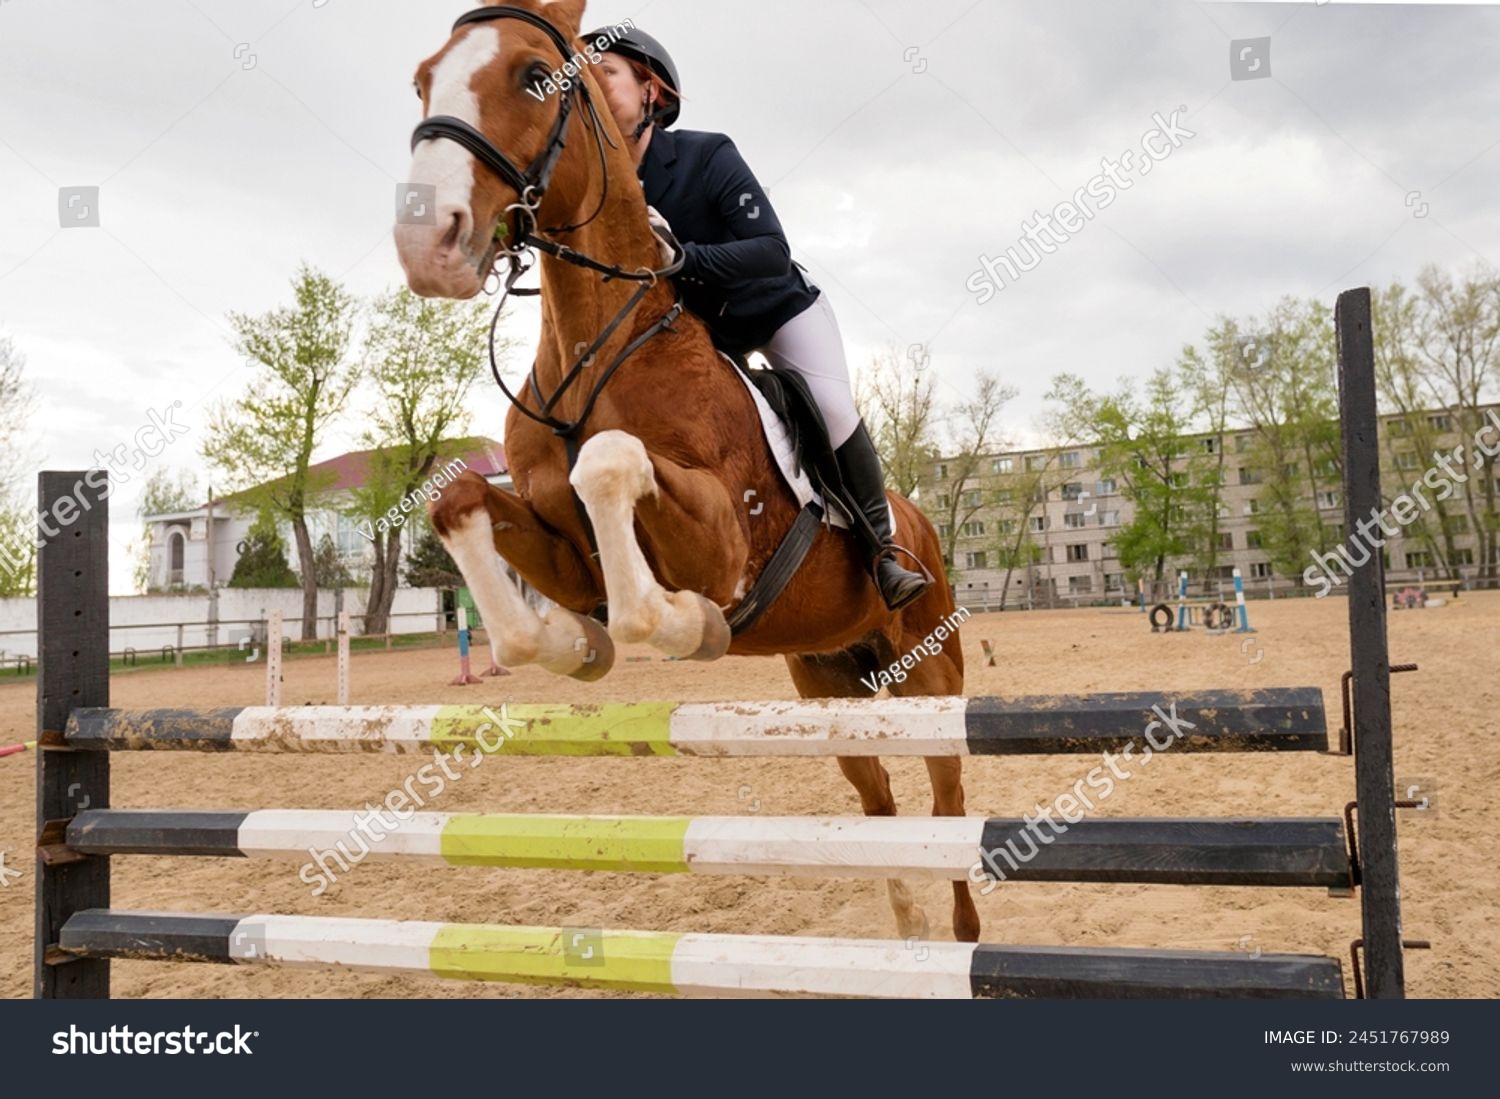 Equestrian event, rider and horse mid-obstacle course. Female jockey in uniform. Show jumping. Horseback riding school #2451767989